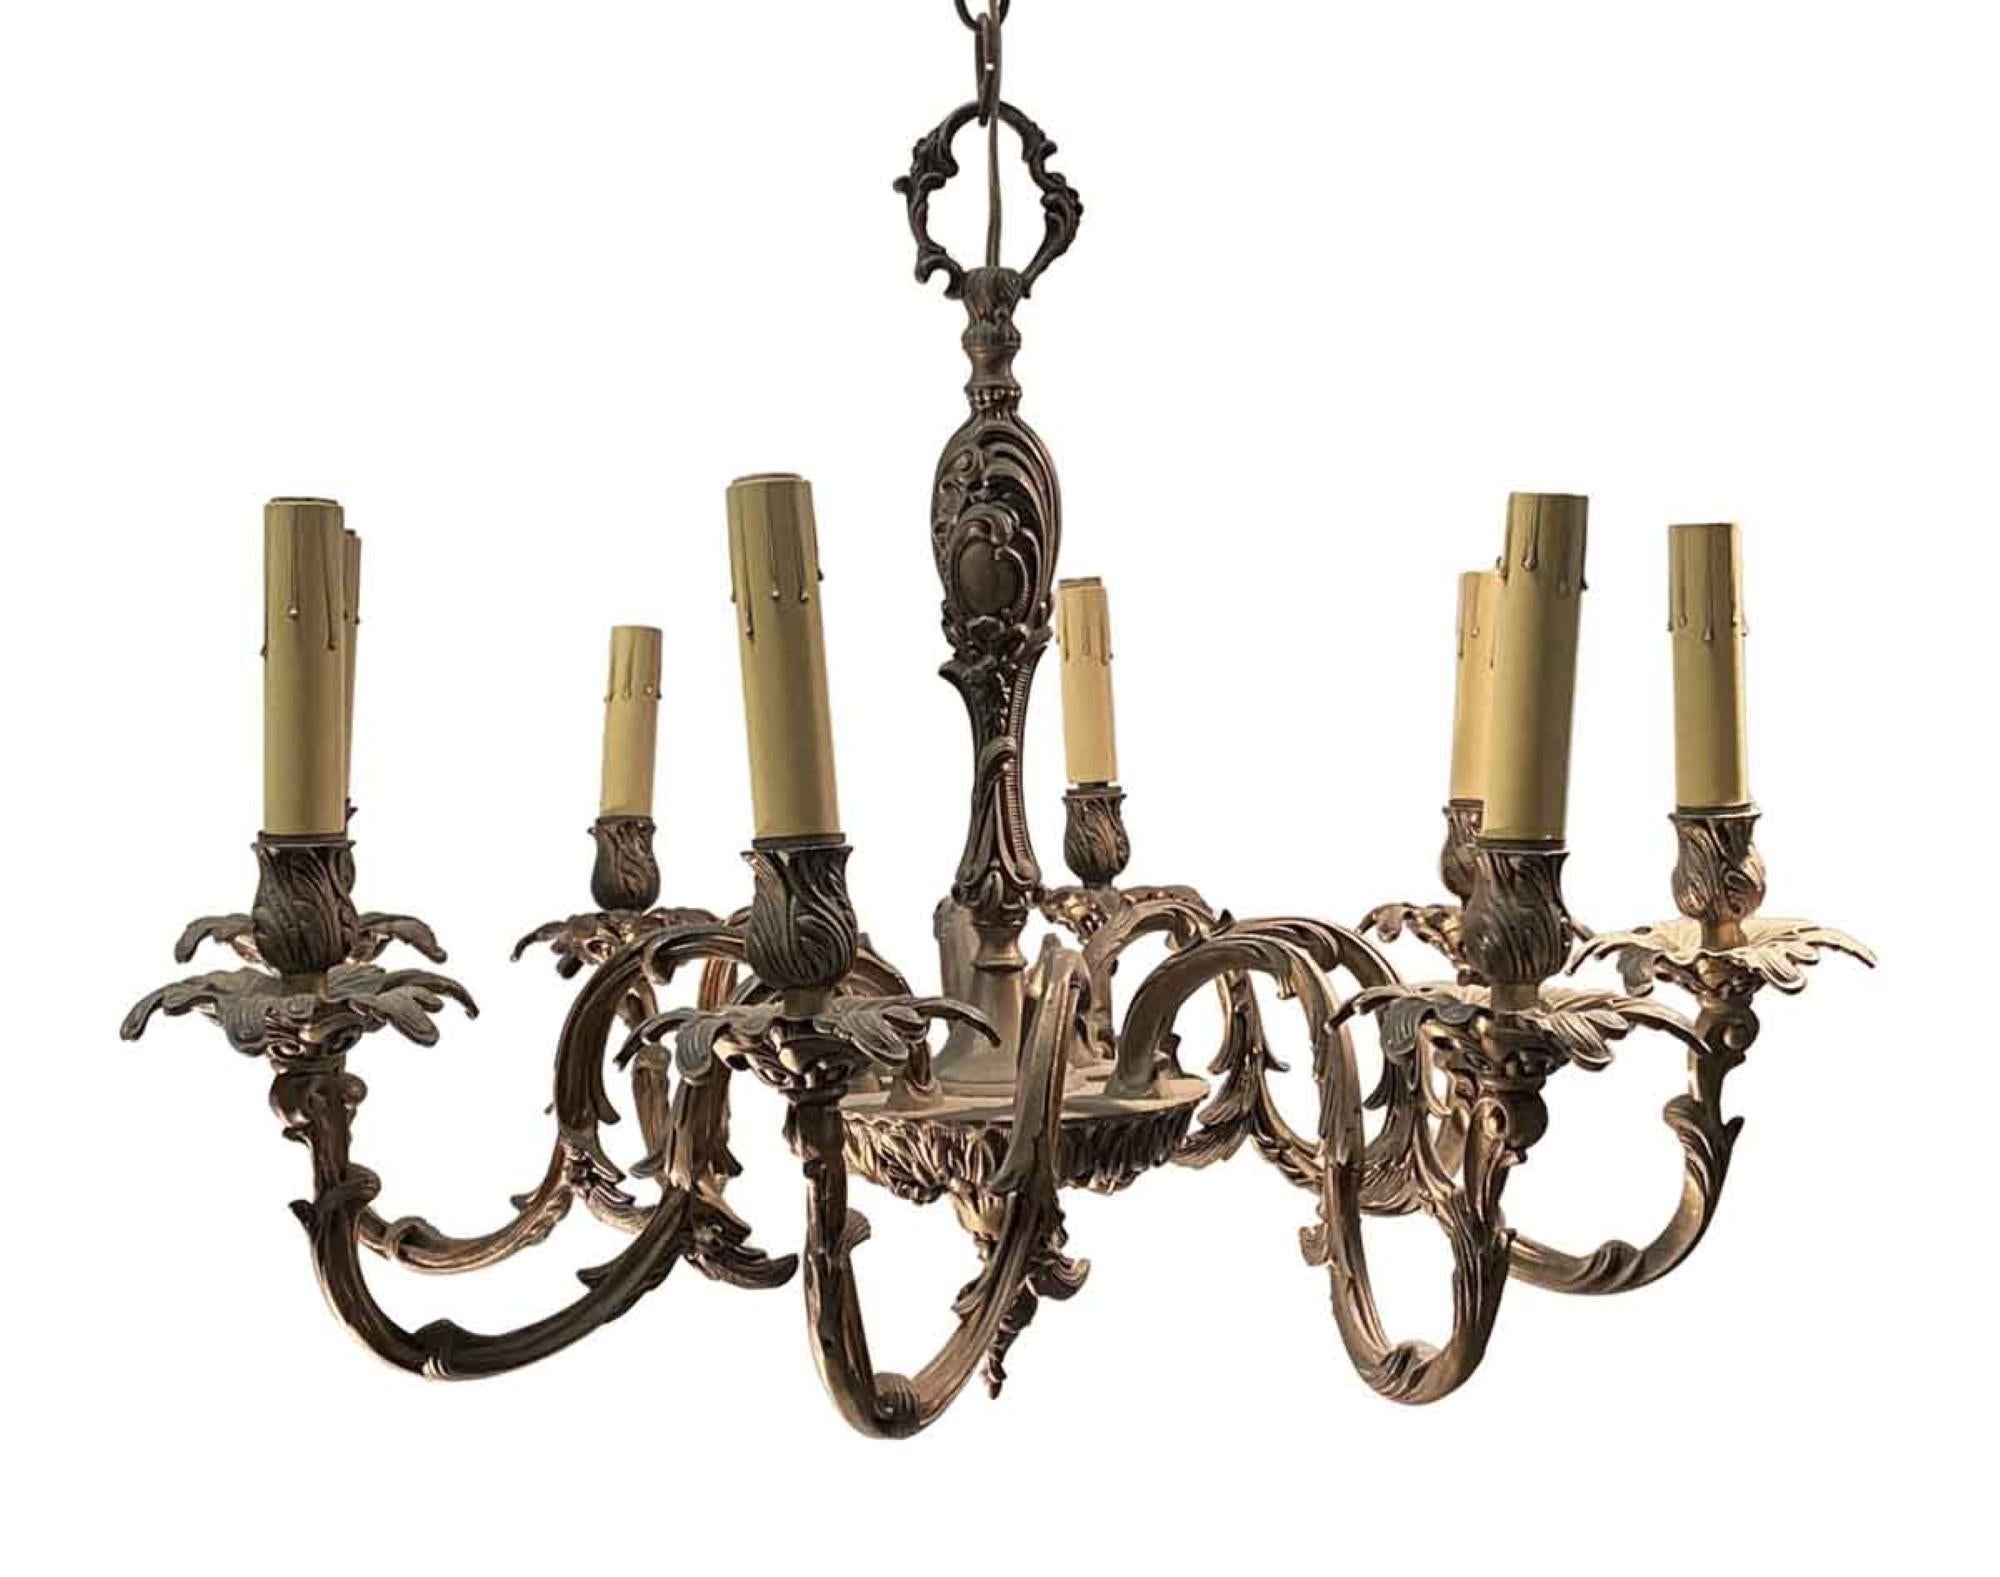 1890 cast bronze Rococo style eight arm French chandelier with organic foliage detail. This can be seen at our 400 Gilligan St location in Scranton. PA.